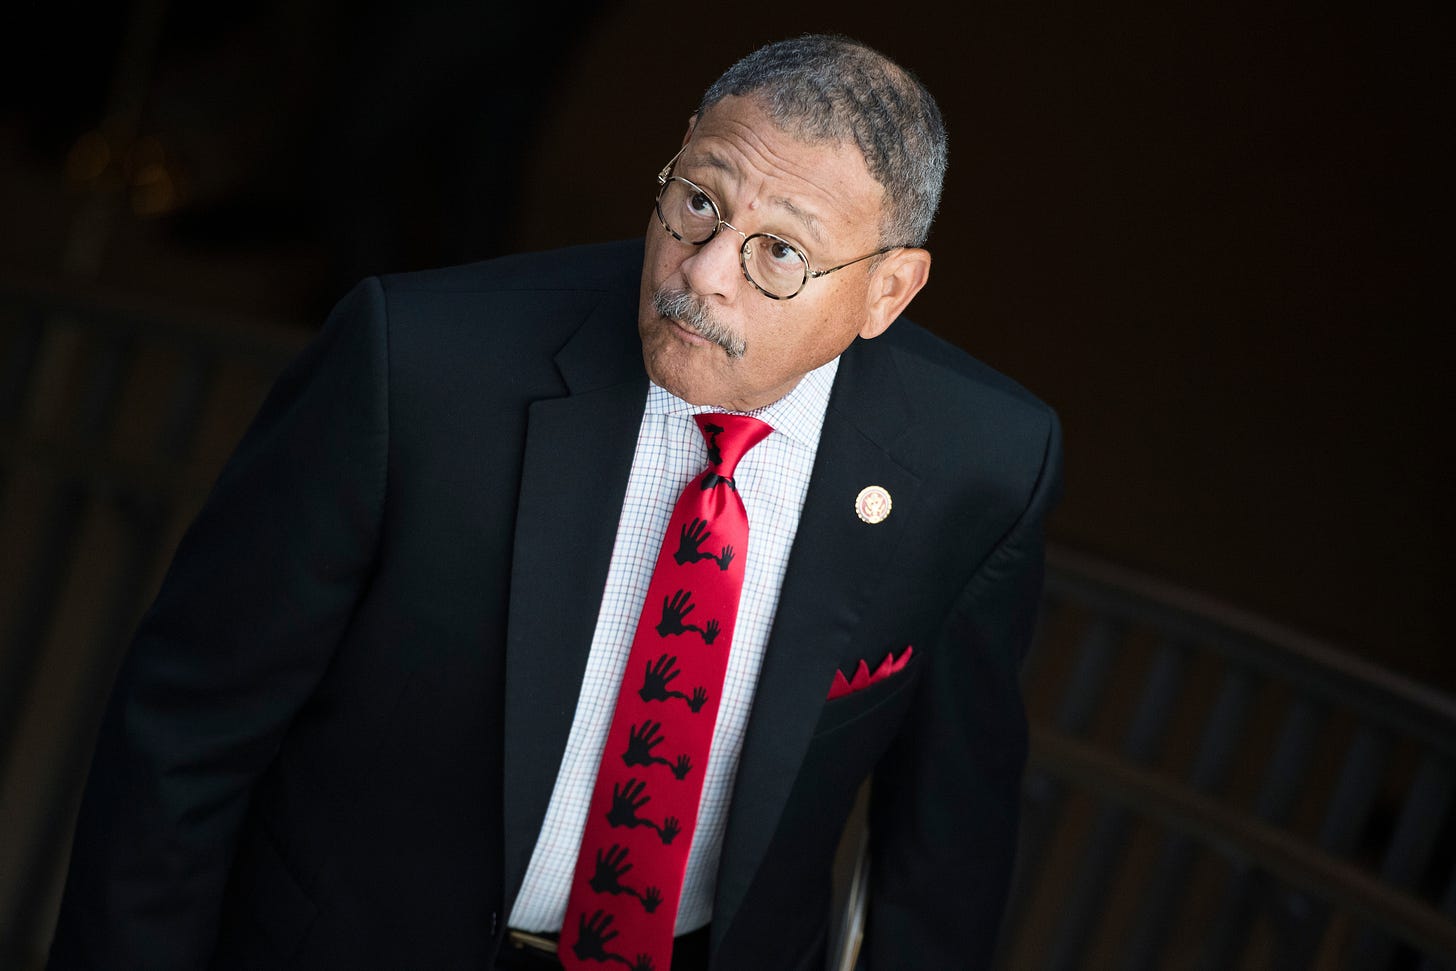 Spending on Christmas parties among allegations in ethics report on Sanford  Bishop - Roll Call